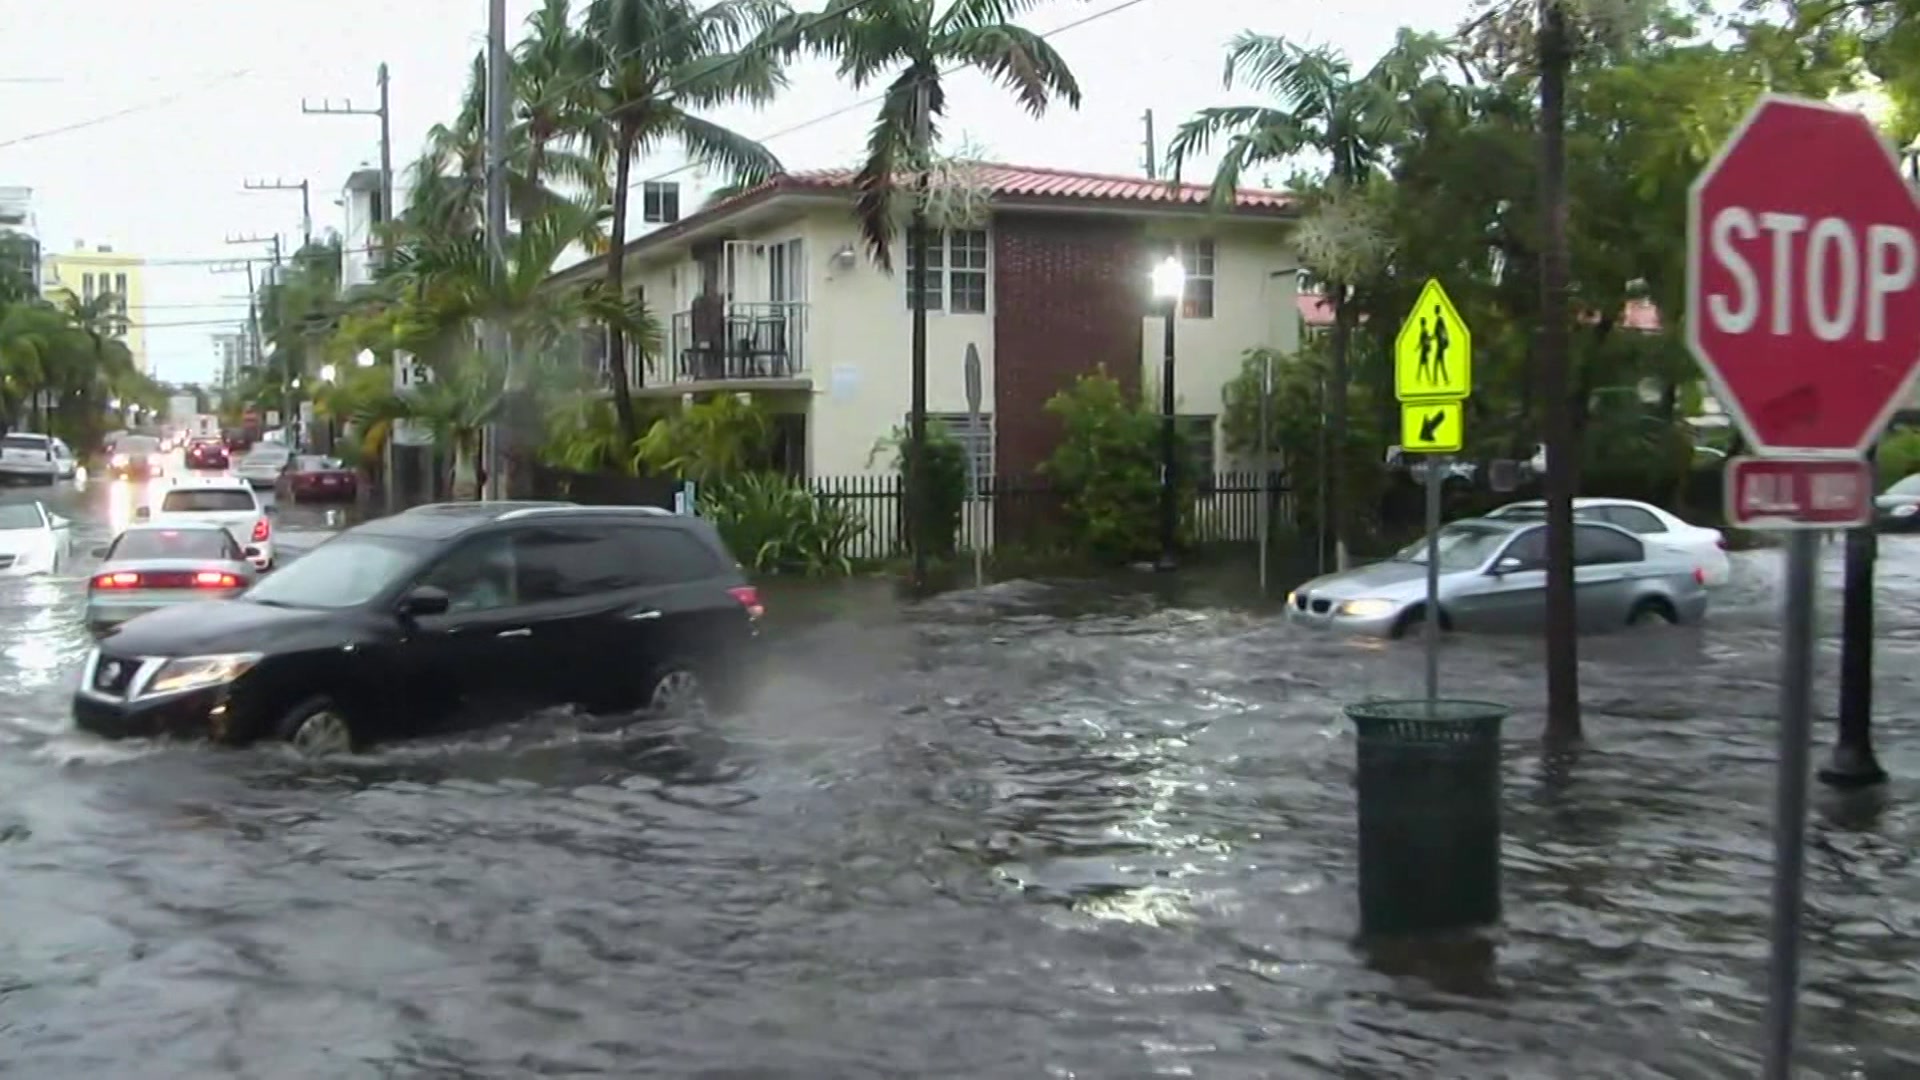 Flood insurance rates expected to soar for thousands of South Floridians as hurricane season begins